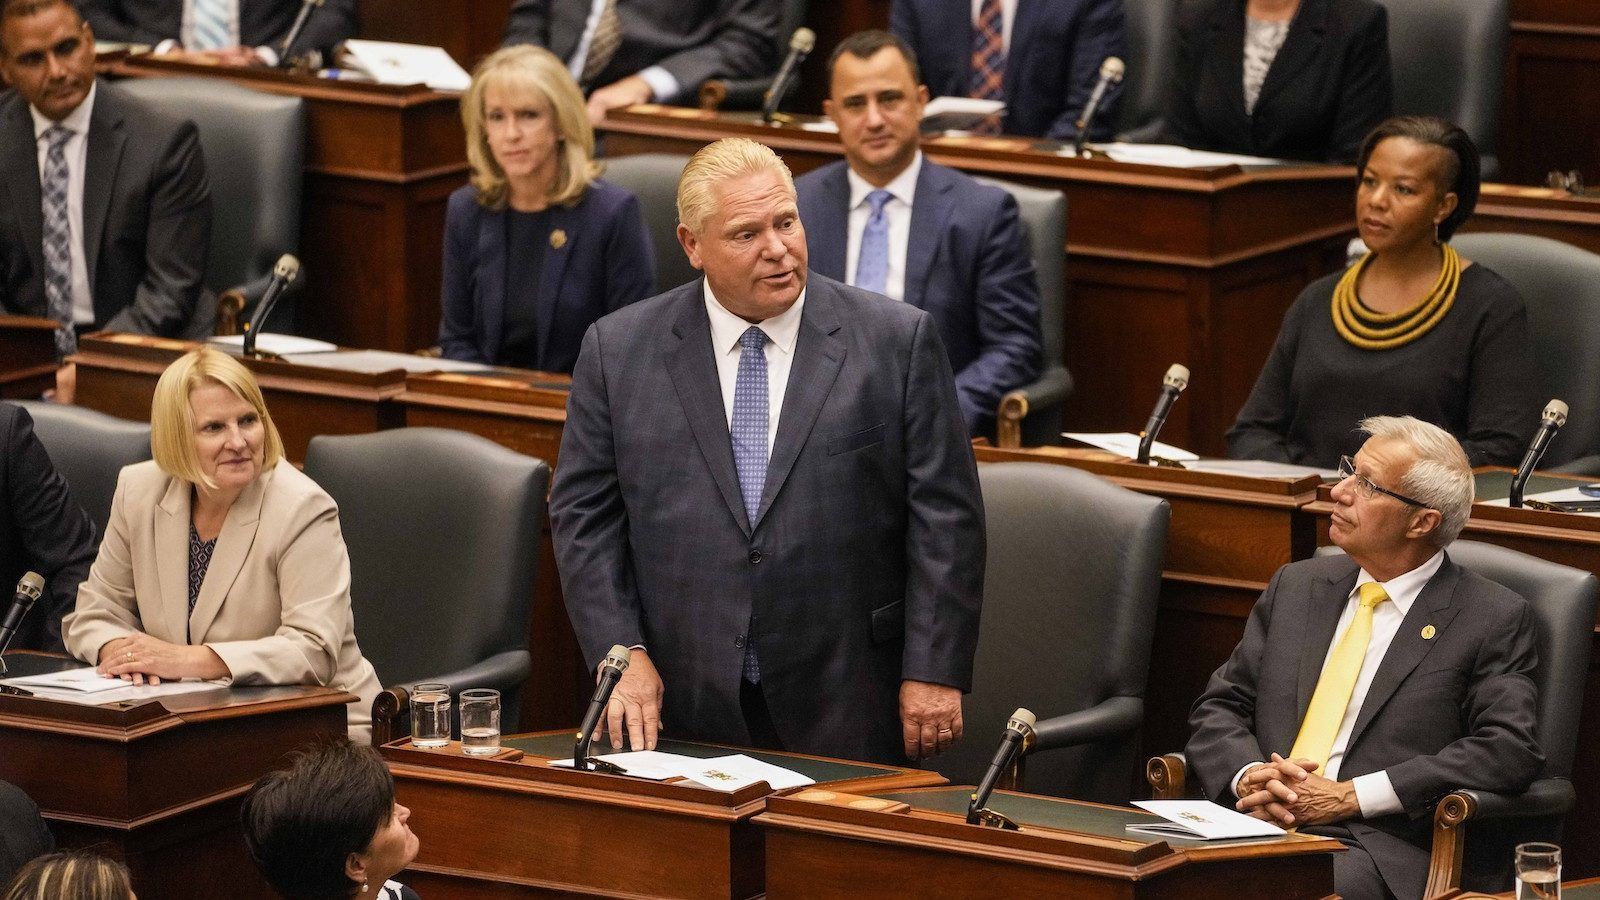 Doug Ford speaks after Lt.-Gov. Elizabeth Dowdeswell delivered her Speech from the Throne at Queen's Park in Toronto, on Tuesday, August 9, 2022. The premier has acknowledged that more can be done to ease health system pressures in Ontario. THE CANADIAN PRESS/Andrew Lahodynskyj